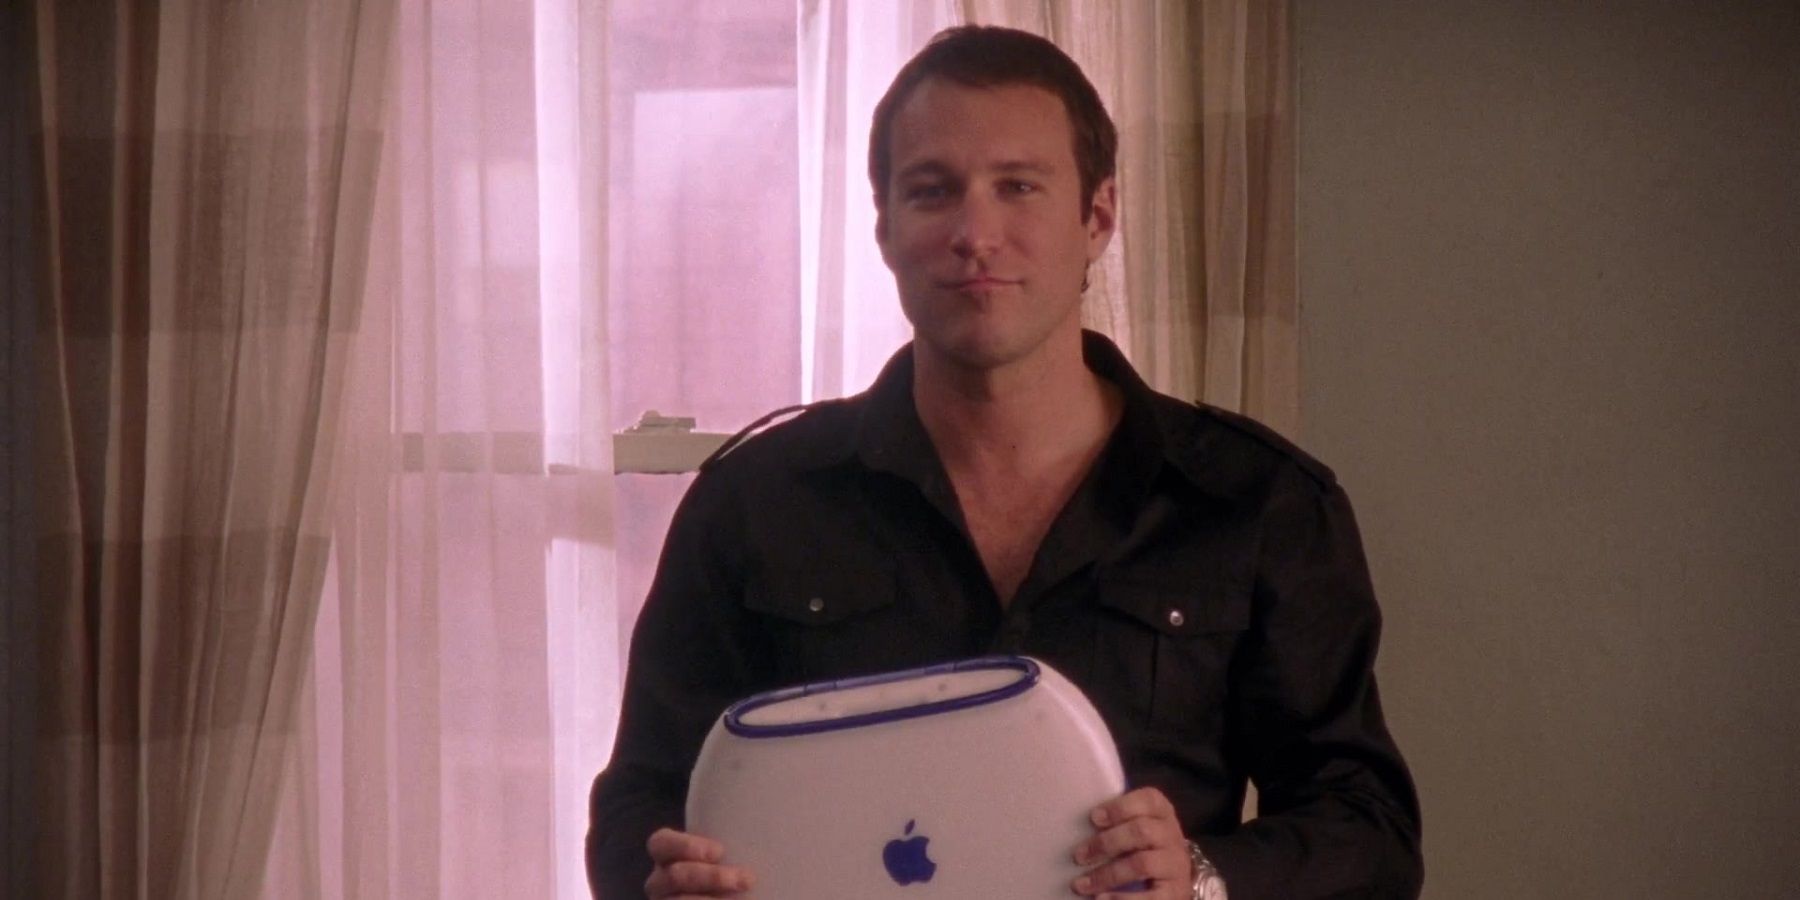 Aidan Shaw holding a computer in Sex and the City